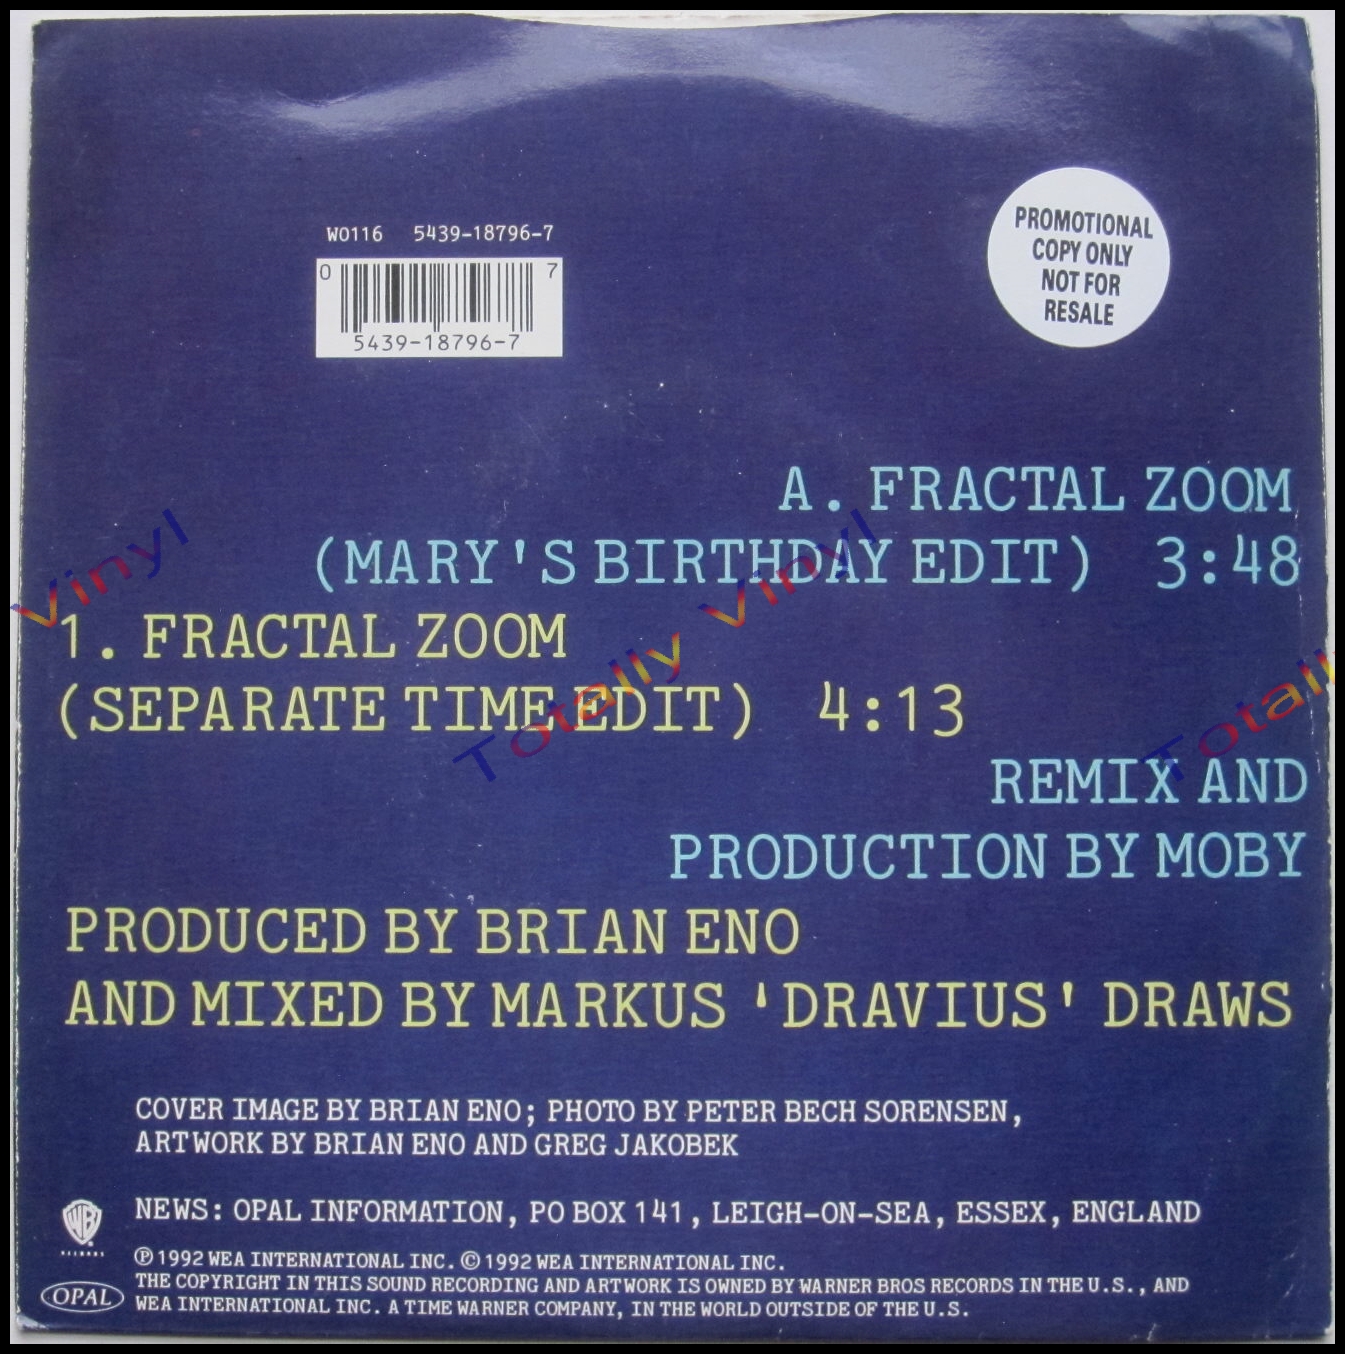 Totally Vinyl Records || Eno, Brian - Fractal zoom (mary's birthday  edit-3.48) / Fractal zoom (separate time edit-4.13) 7 inch Picture Cover  Pre Release